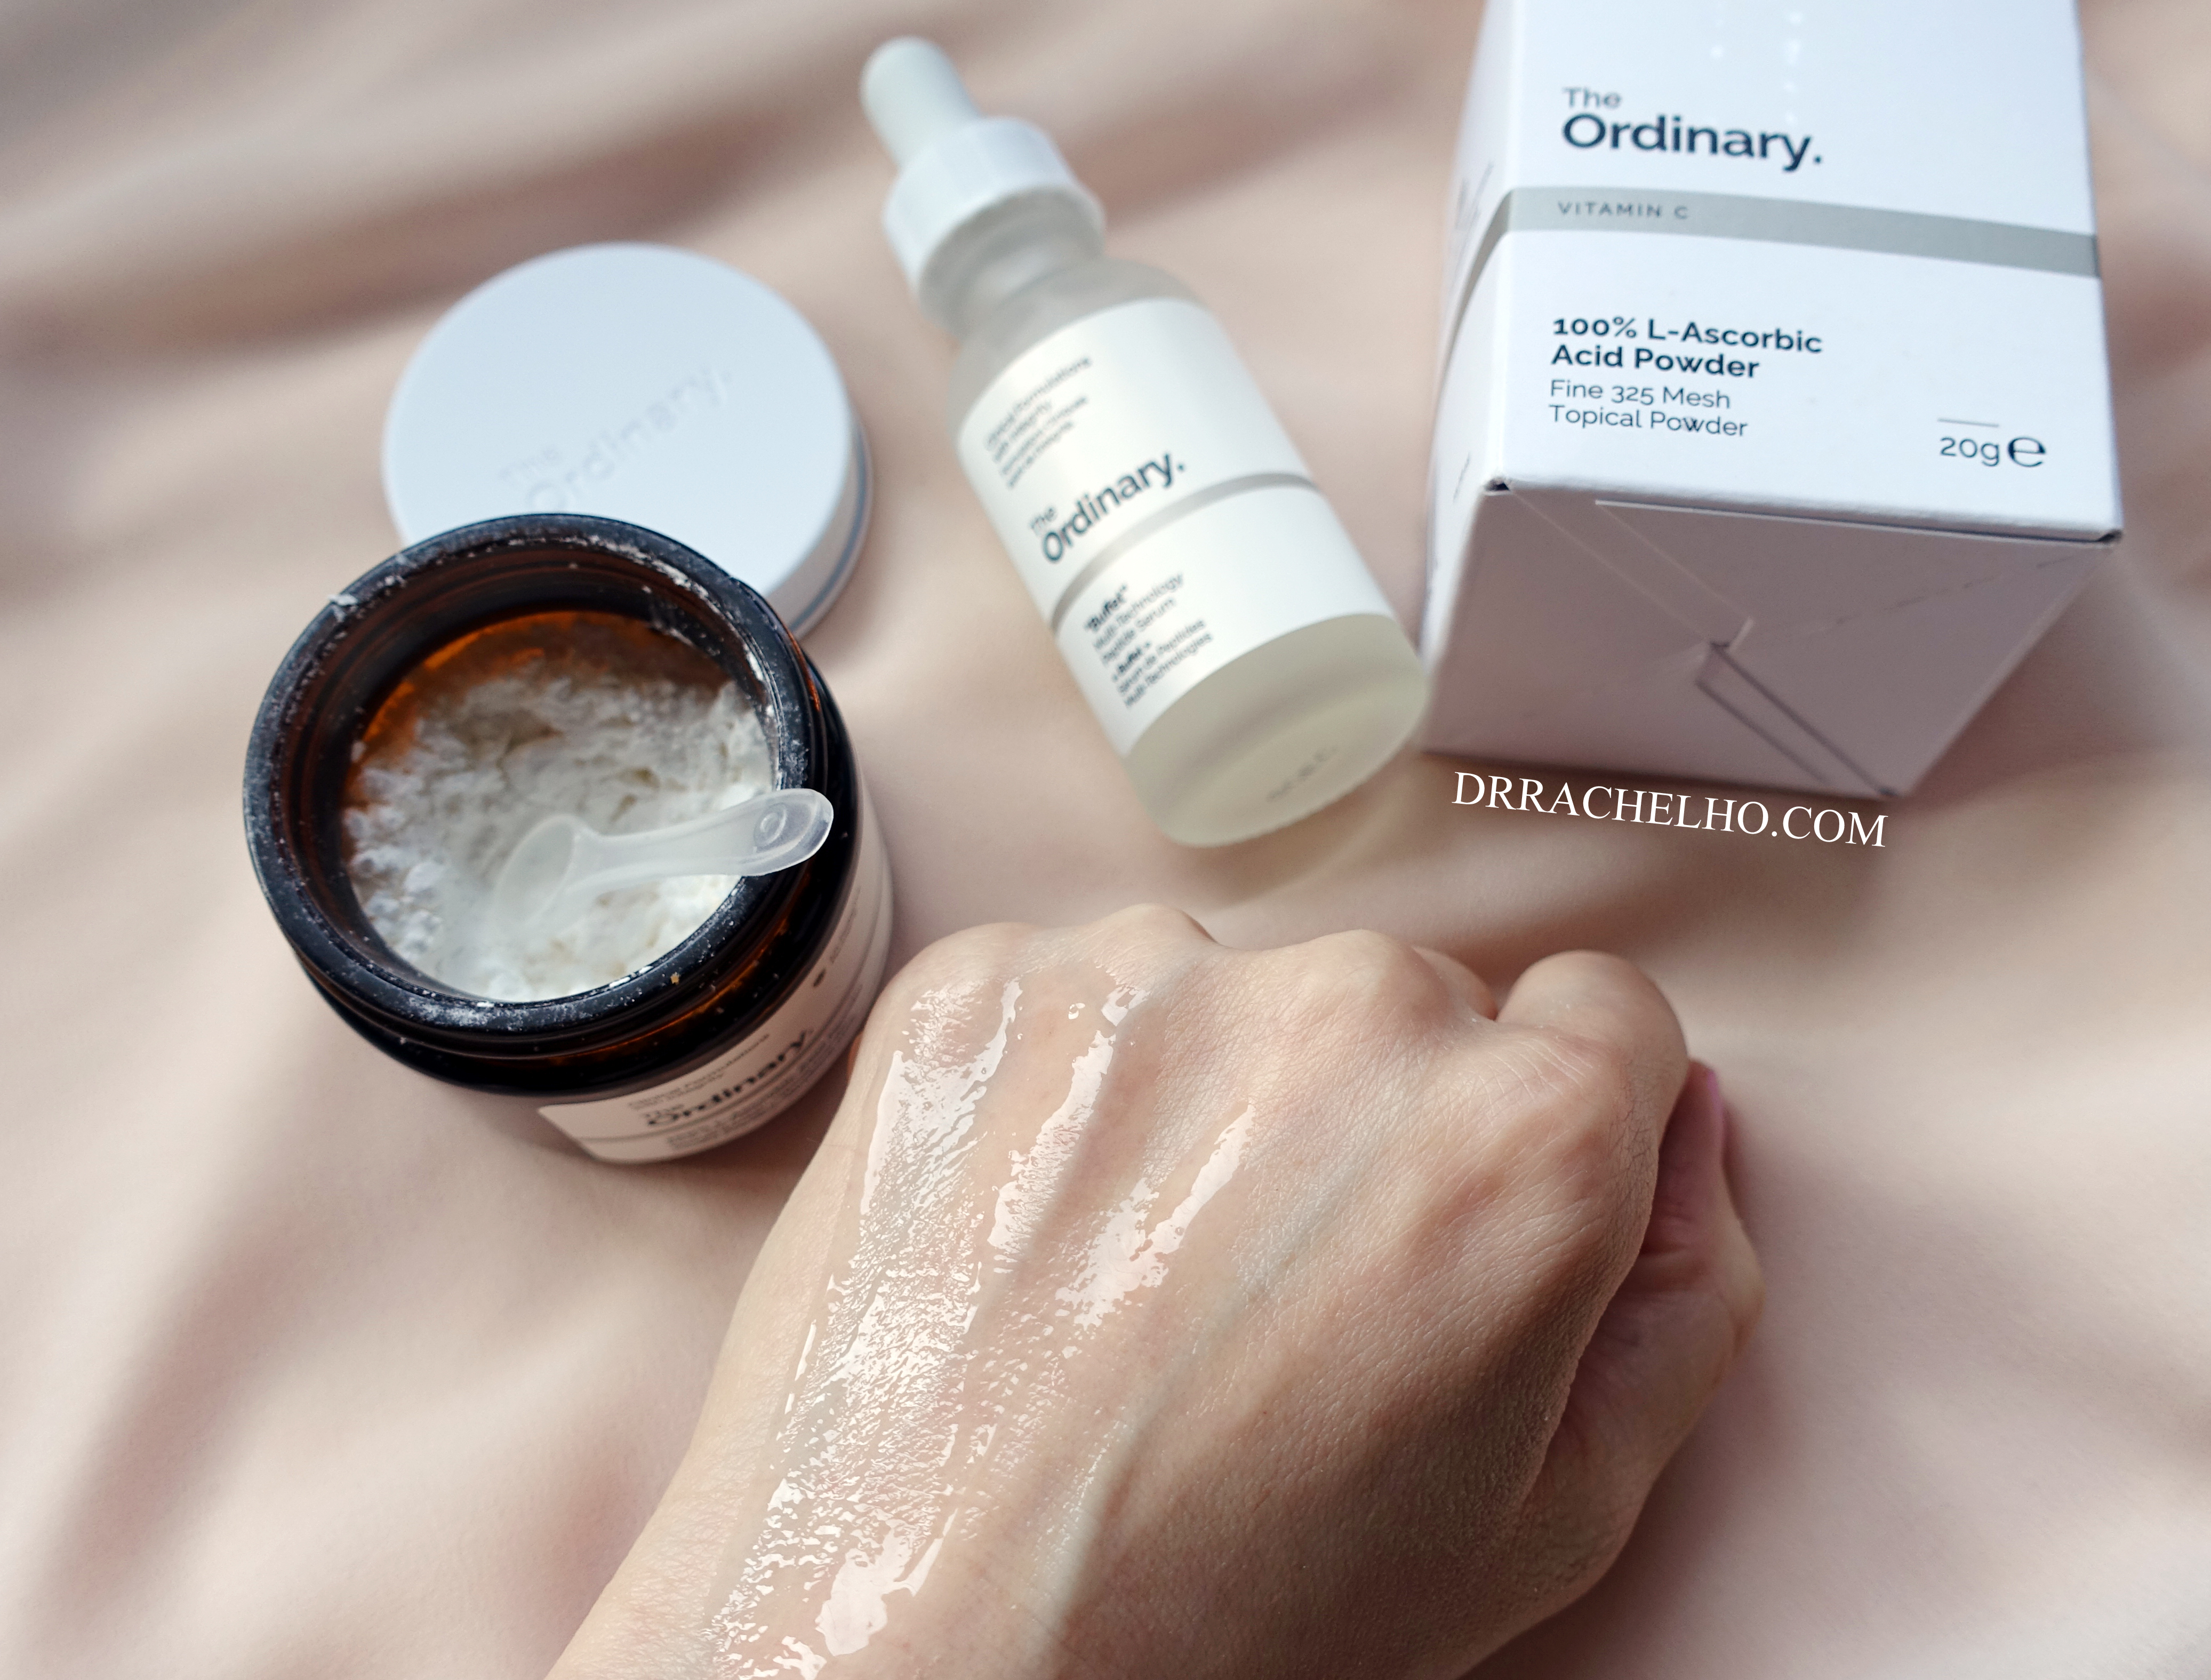 Dr Rachel | The Ordinary Skincare Review & Ingredients Decoded